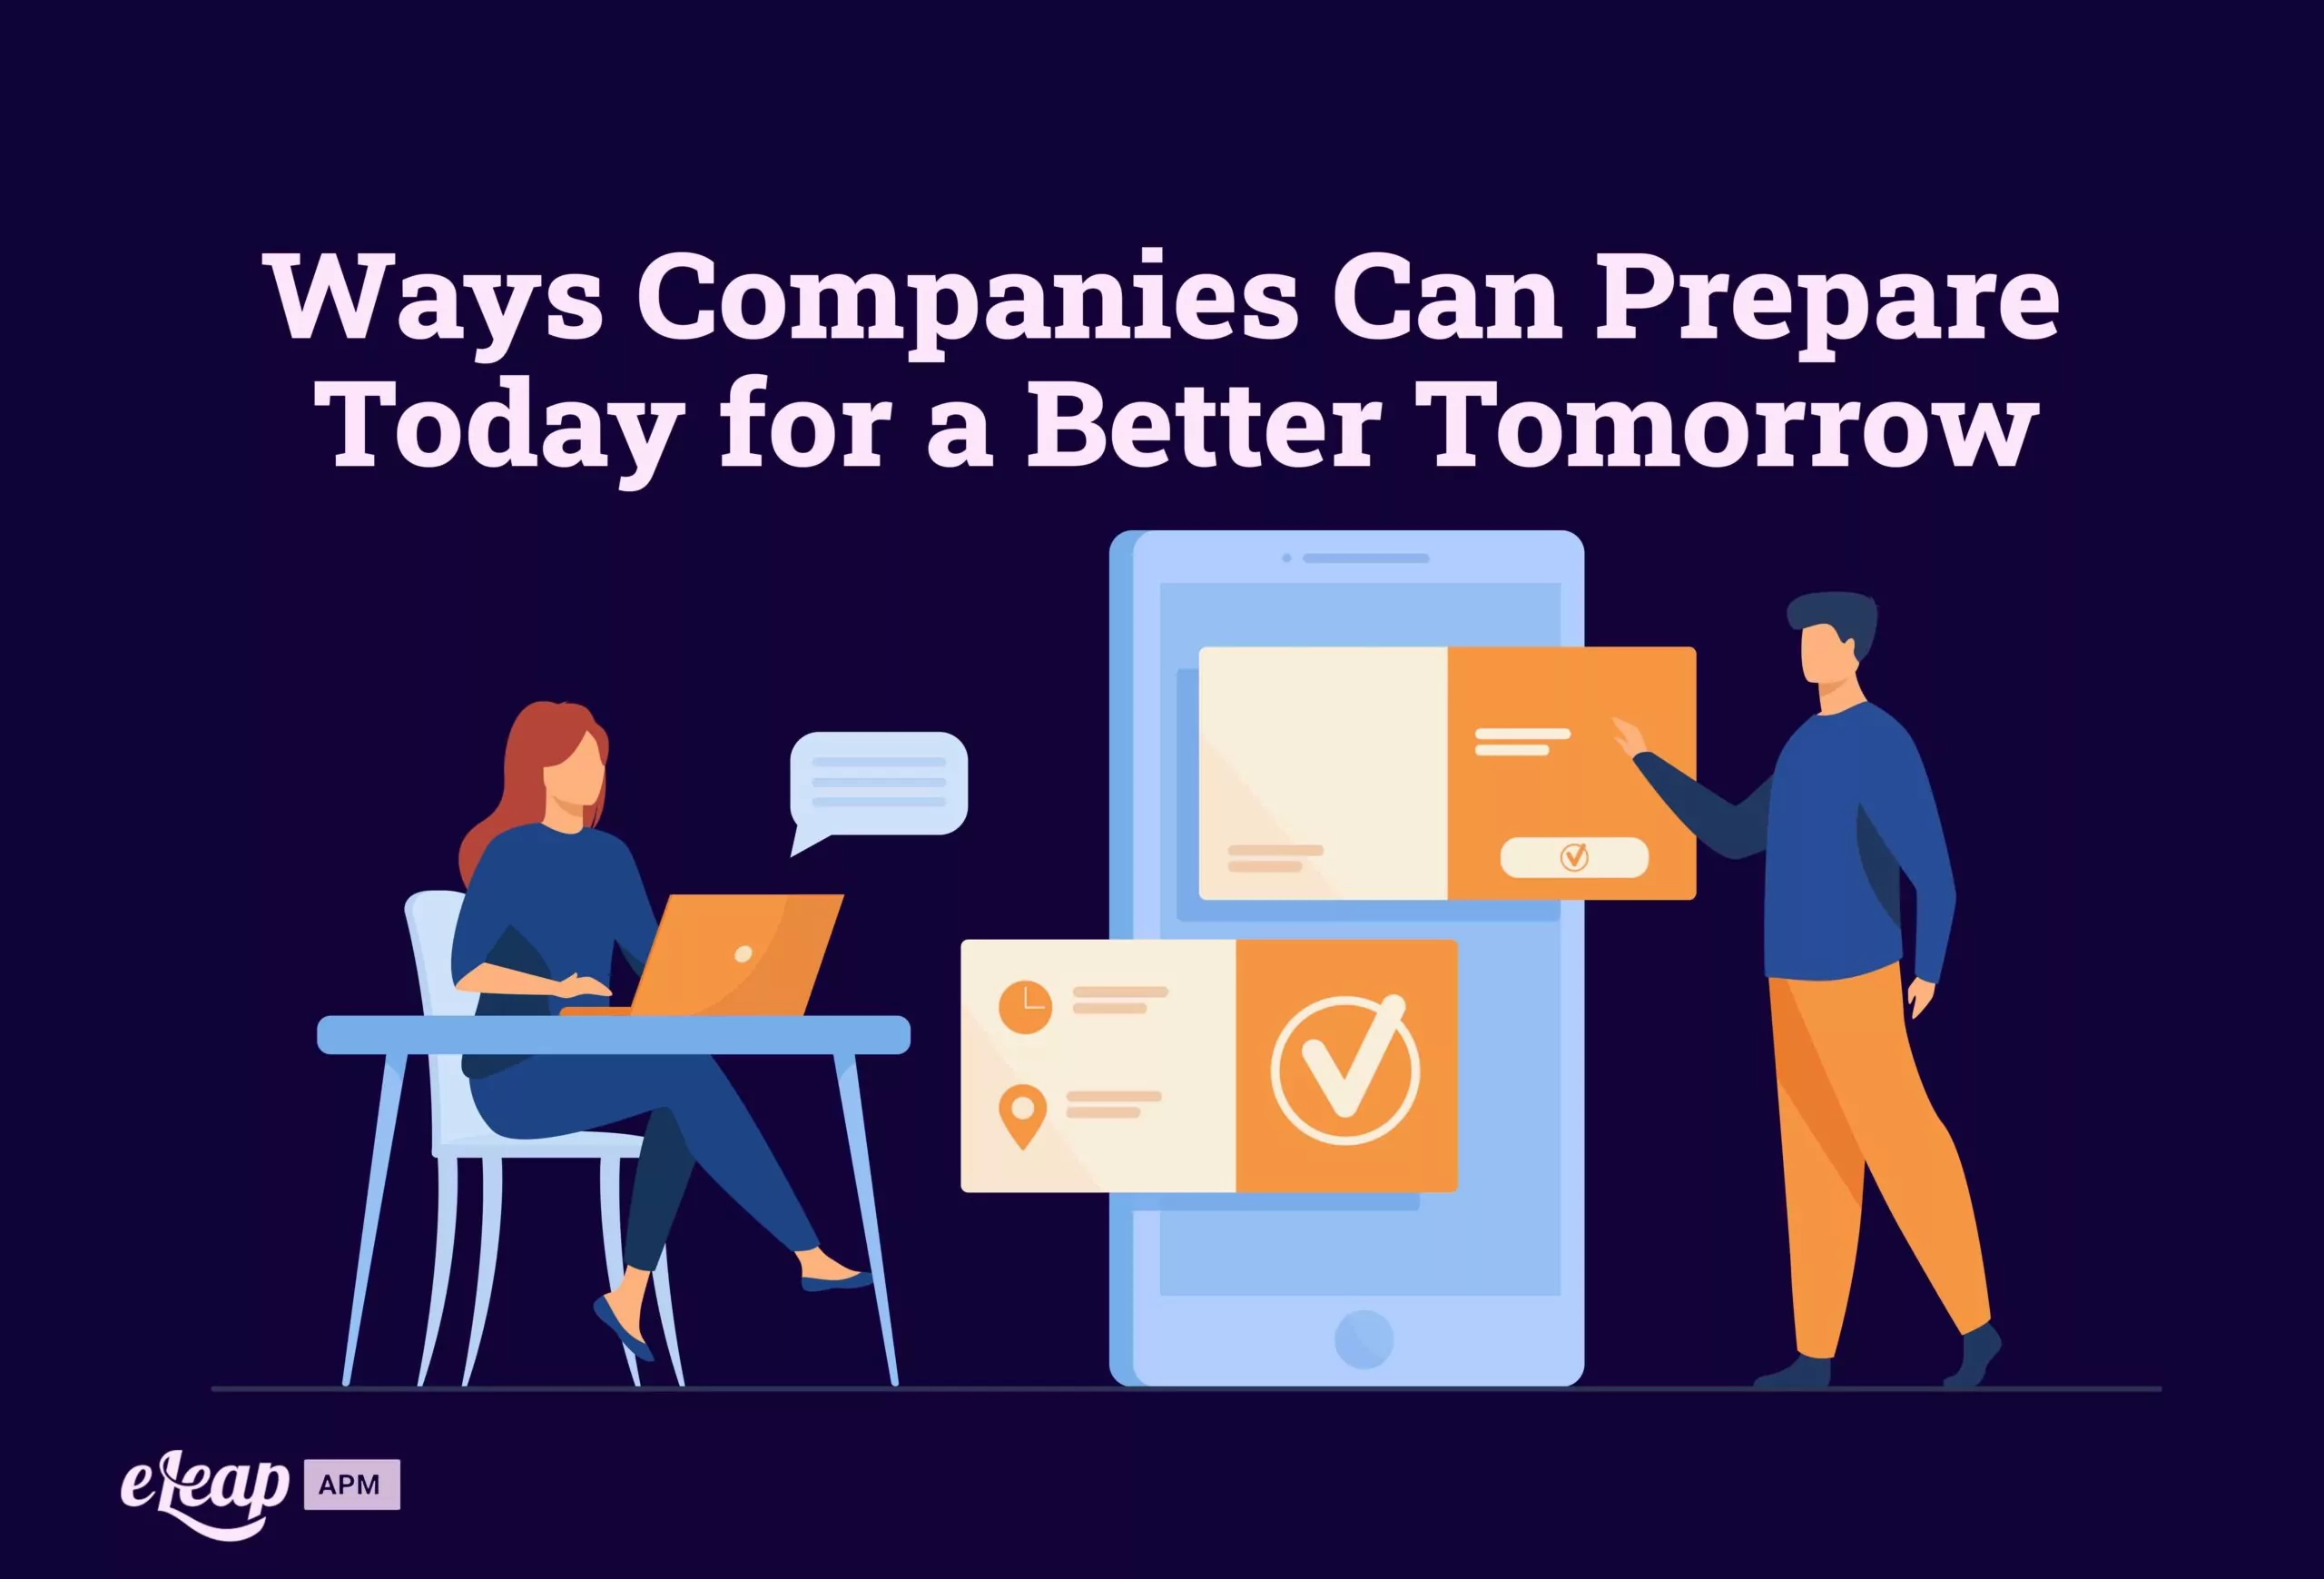 Ways Companies Can Prepare Today for a Better Tomorrow